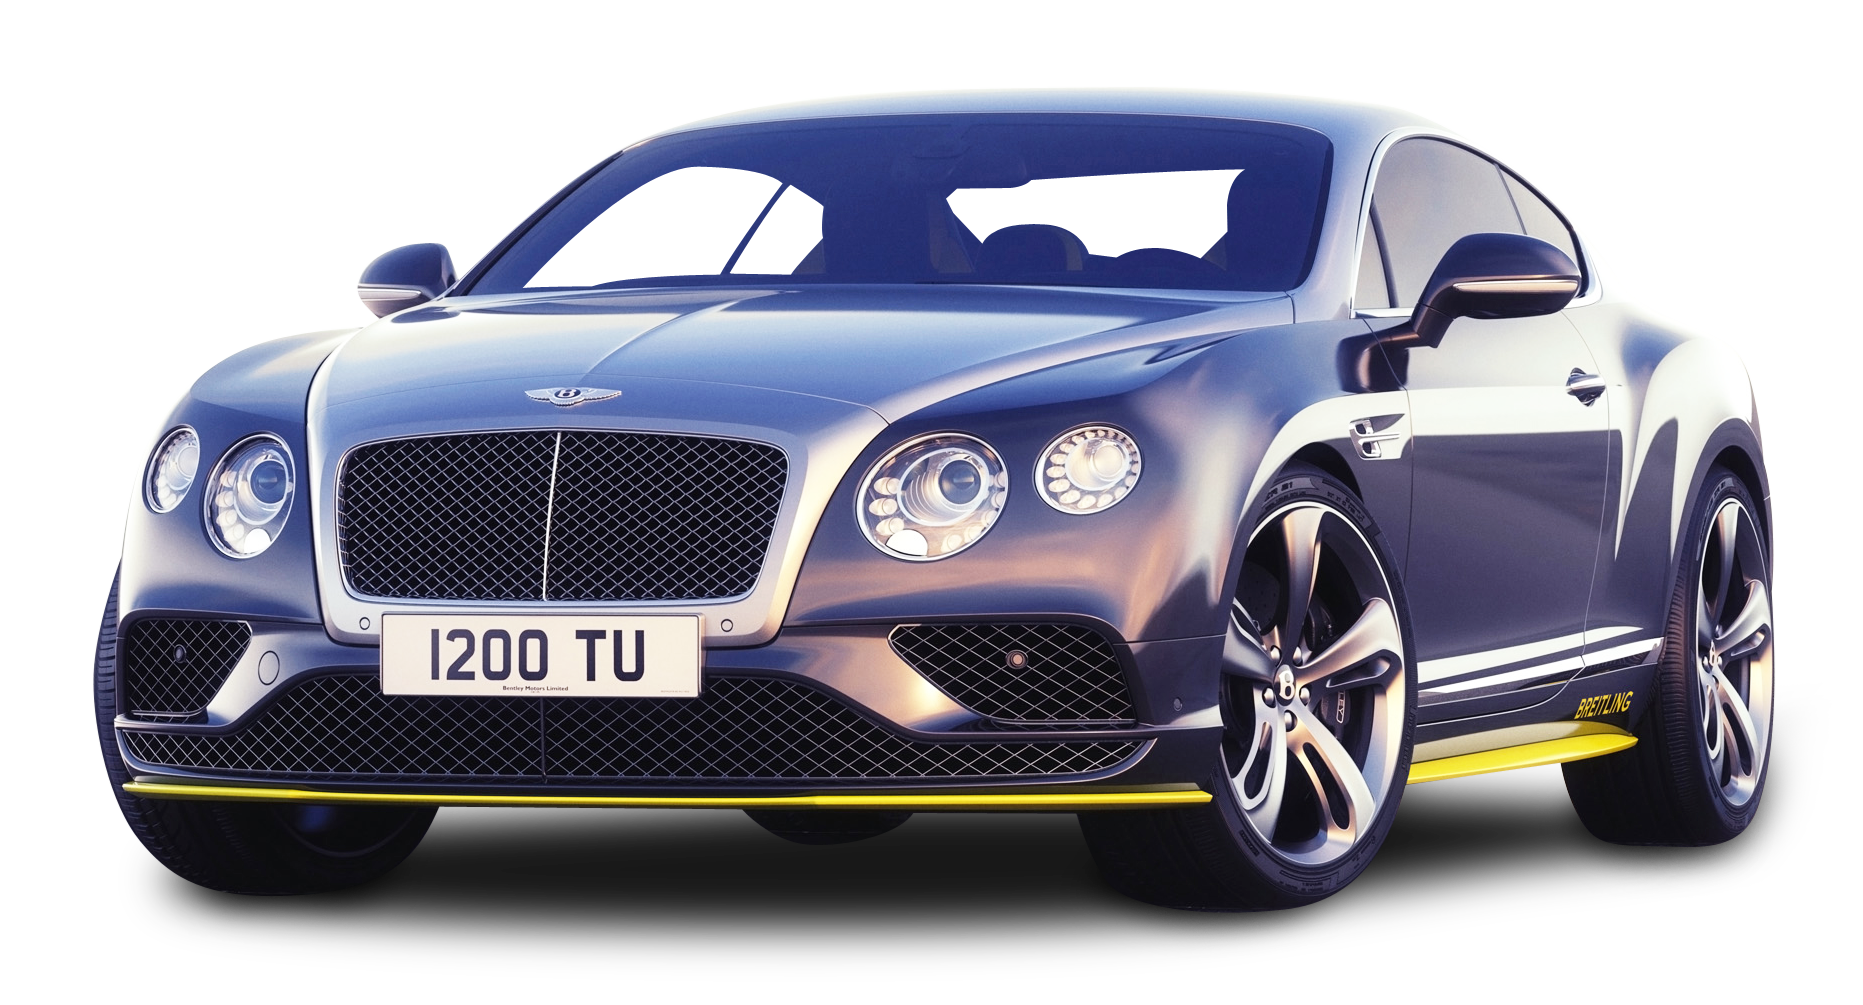 Gray Bentley Continental Gt Speed Car Png Image - Bentley, Transparent background PNG HD thumbnail